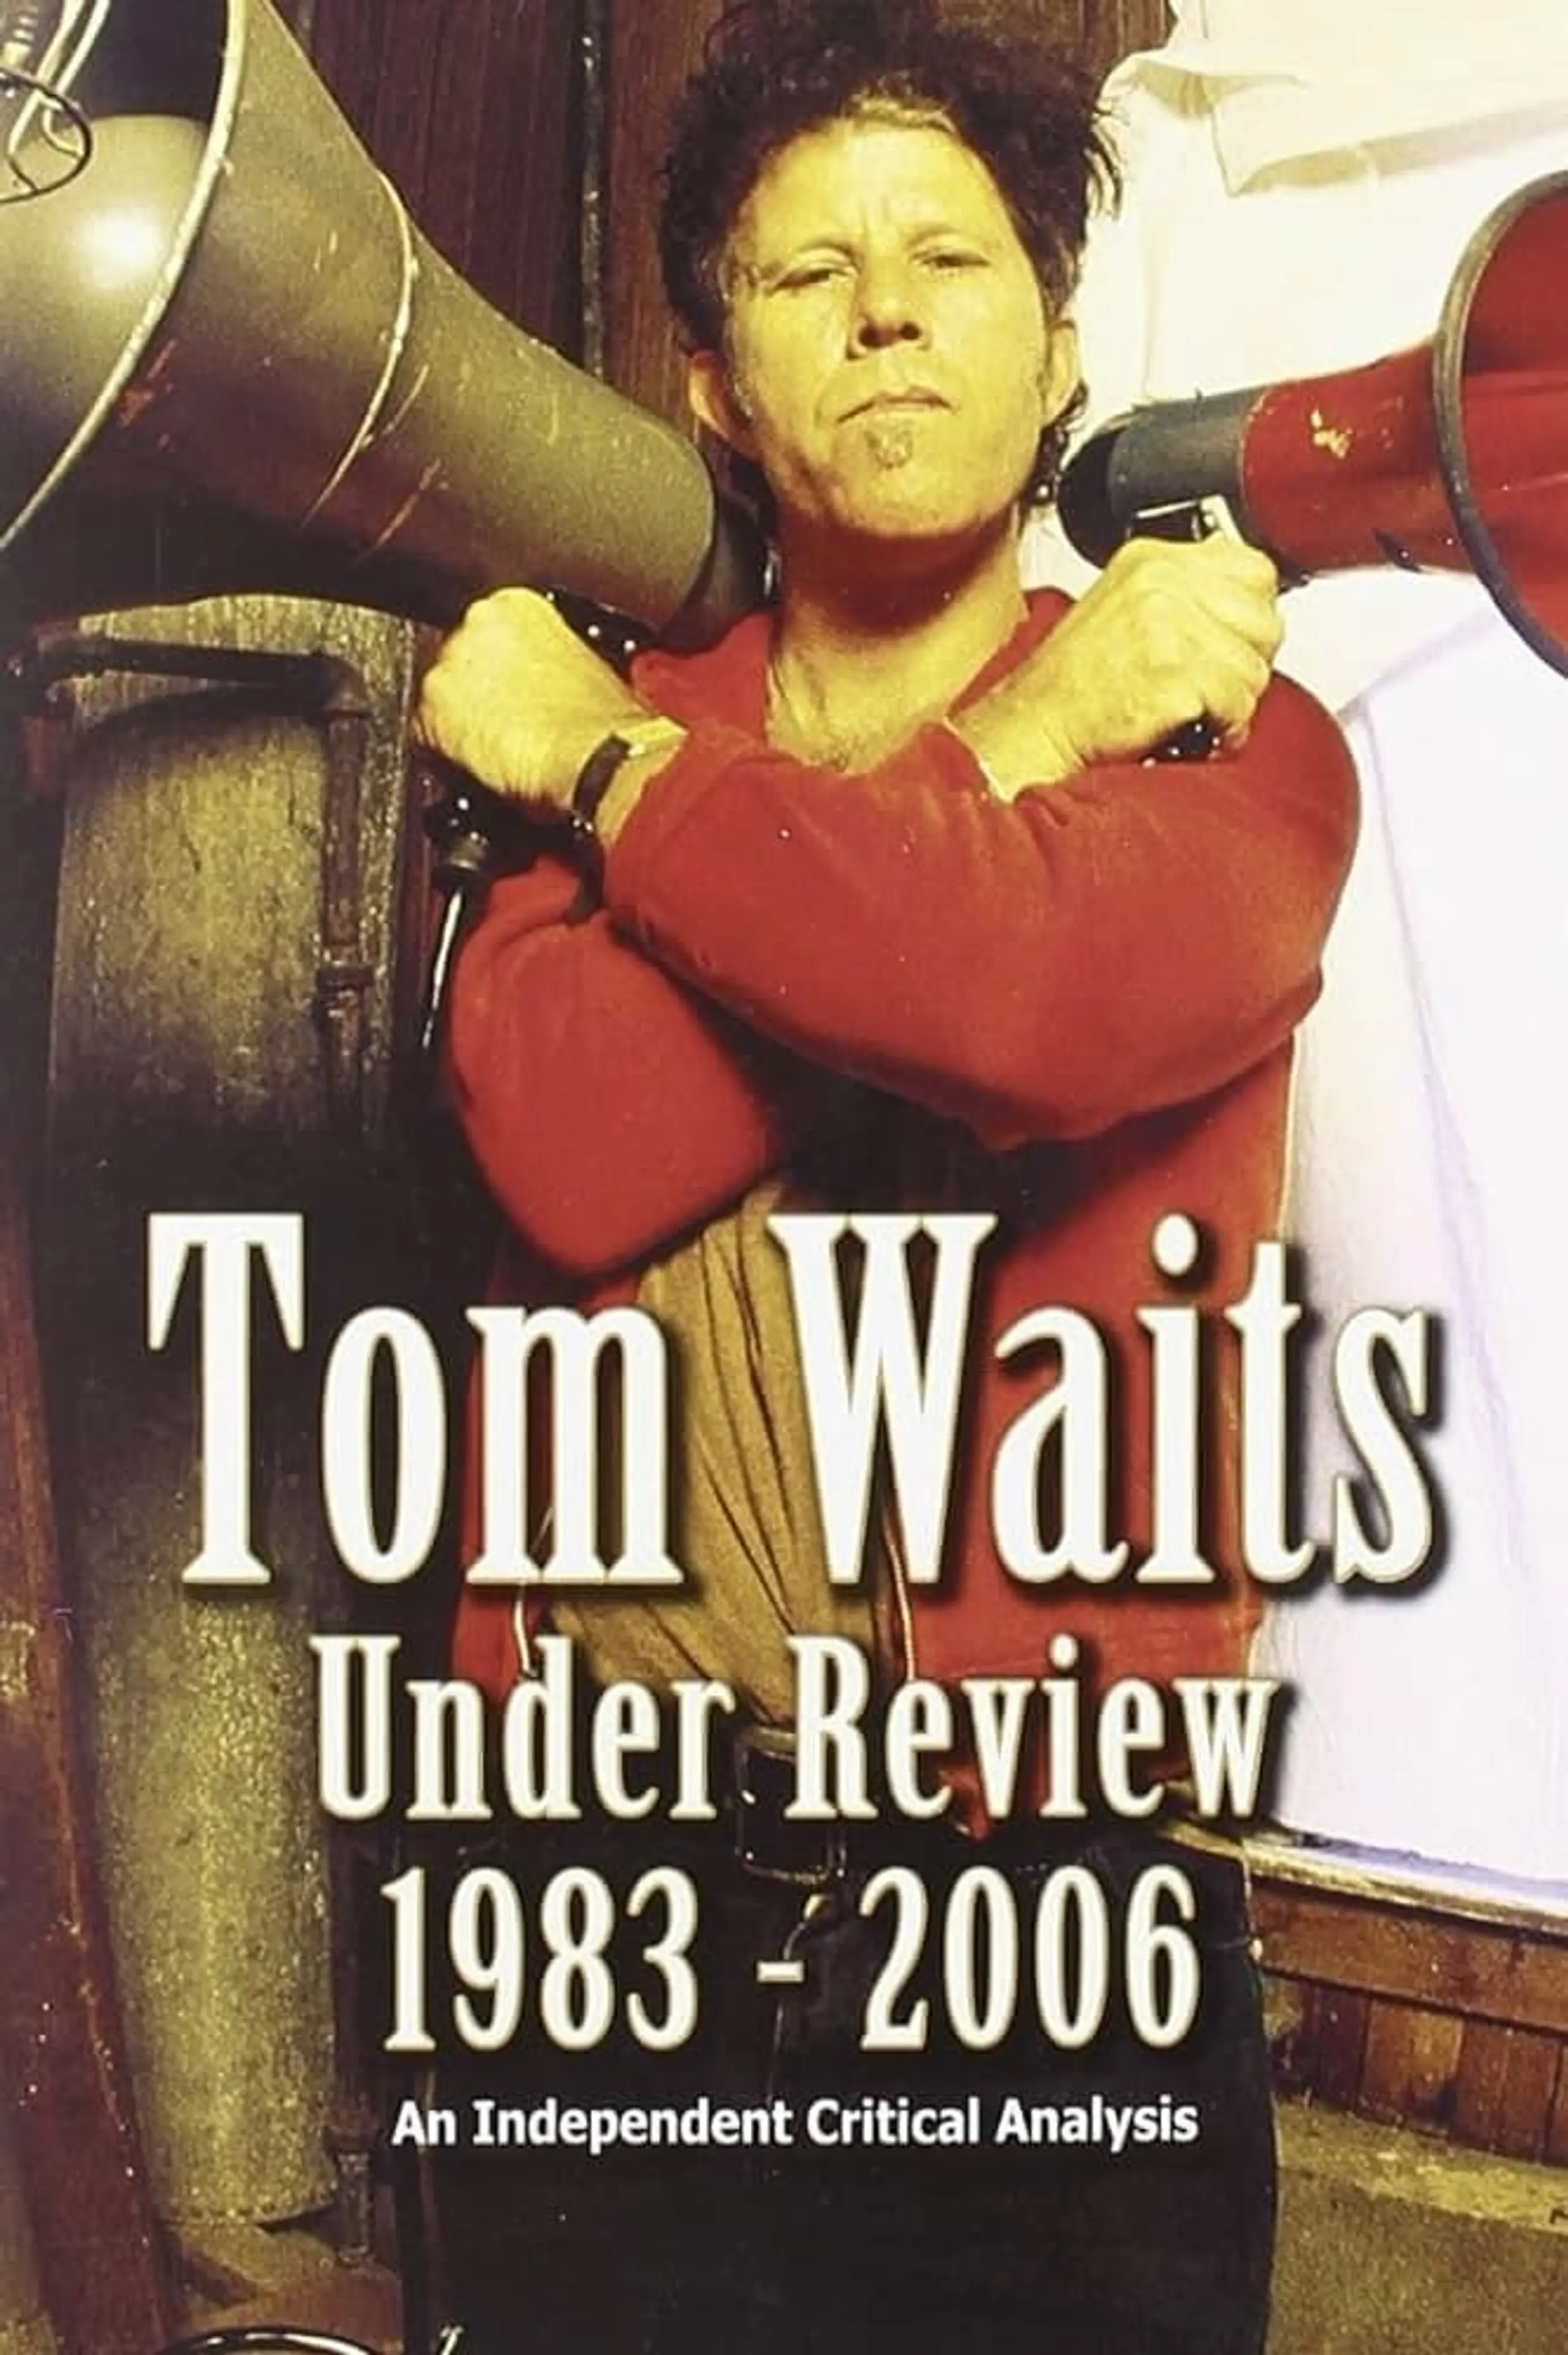 Tom Waits Under Review 1983-2006